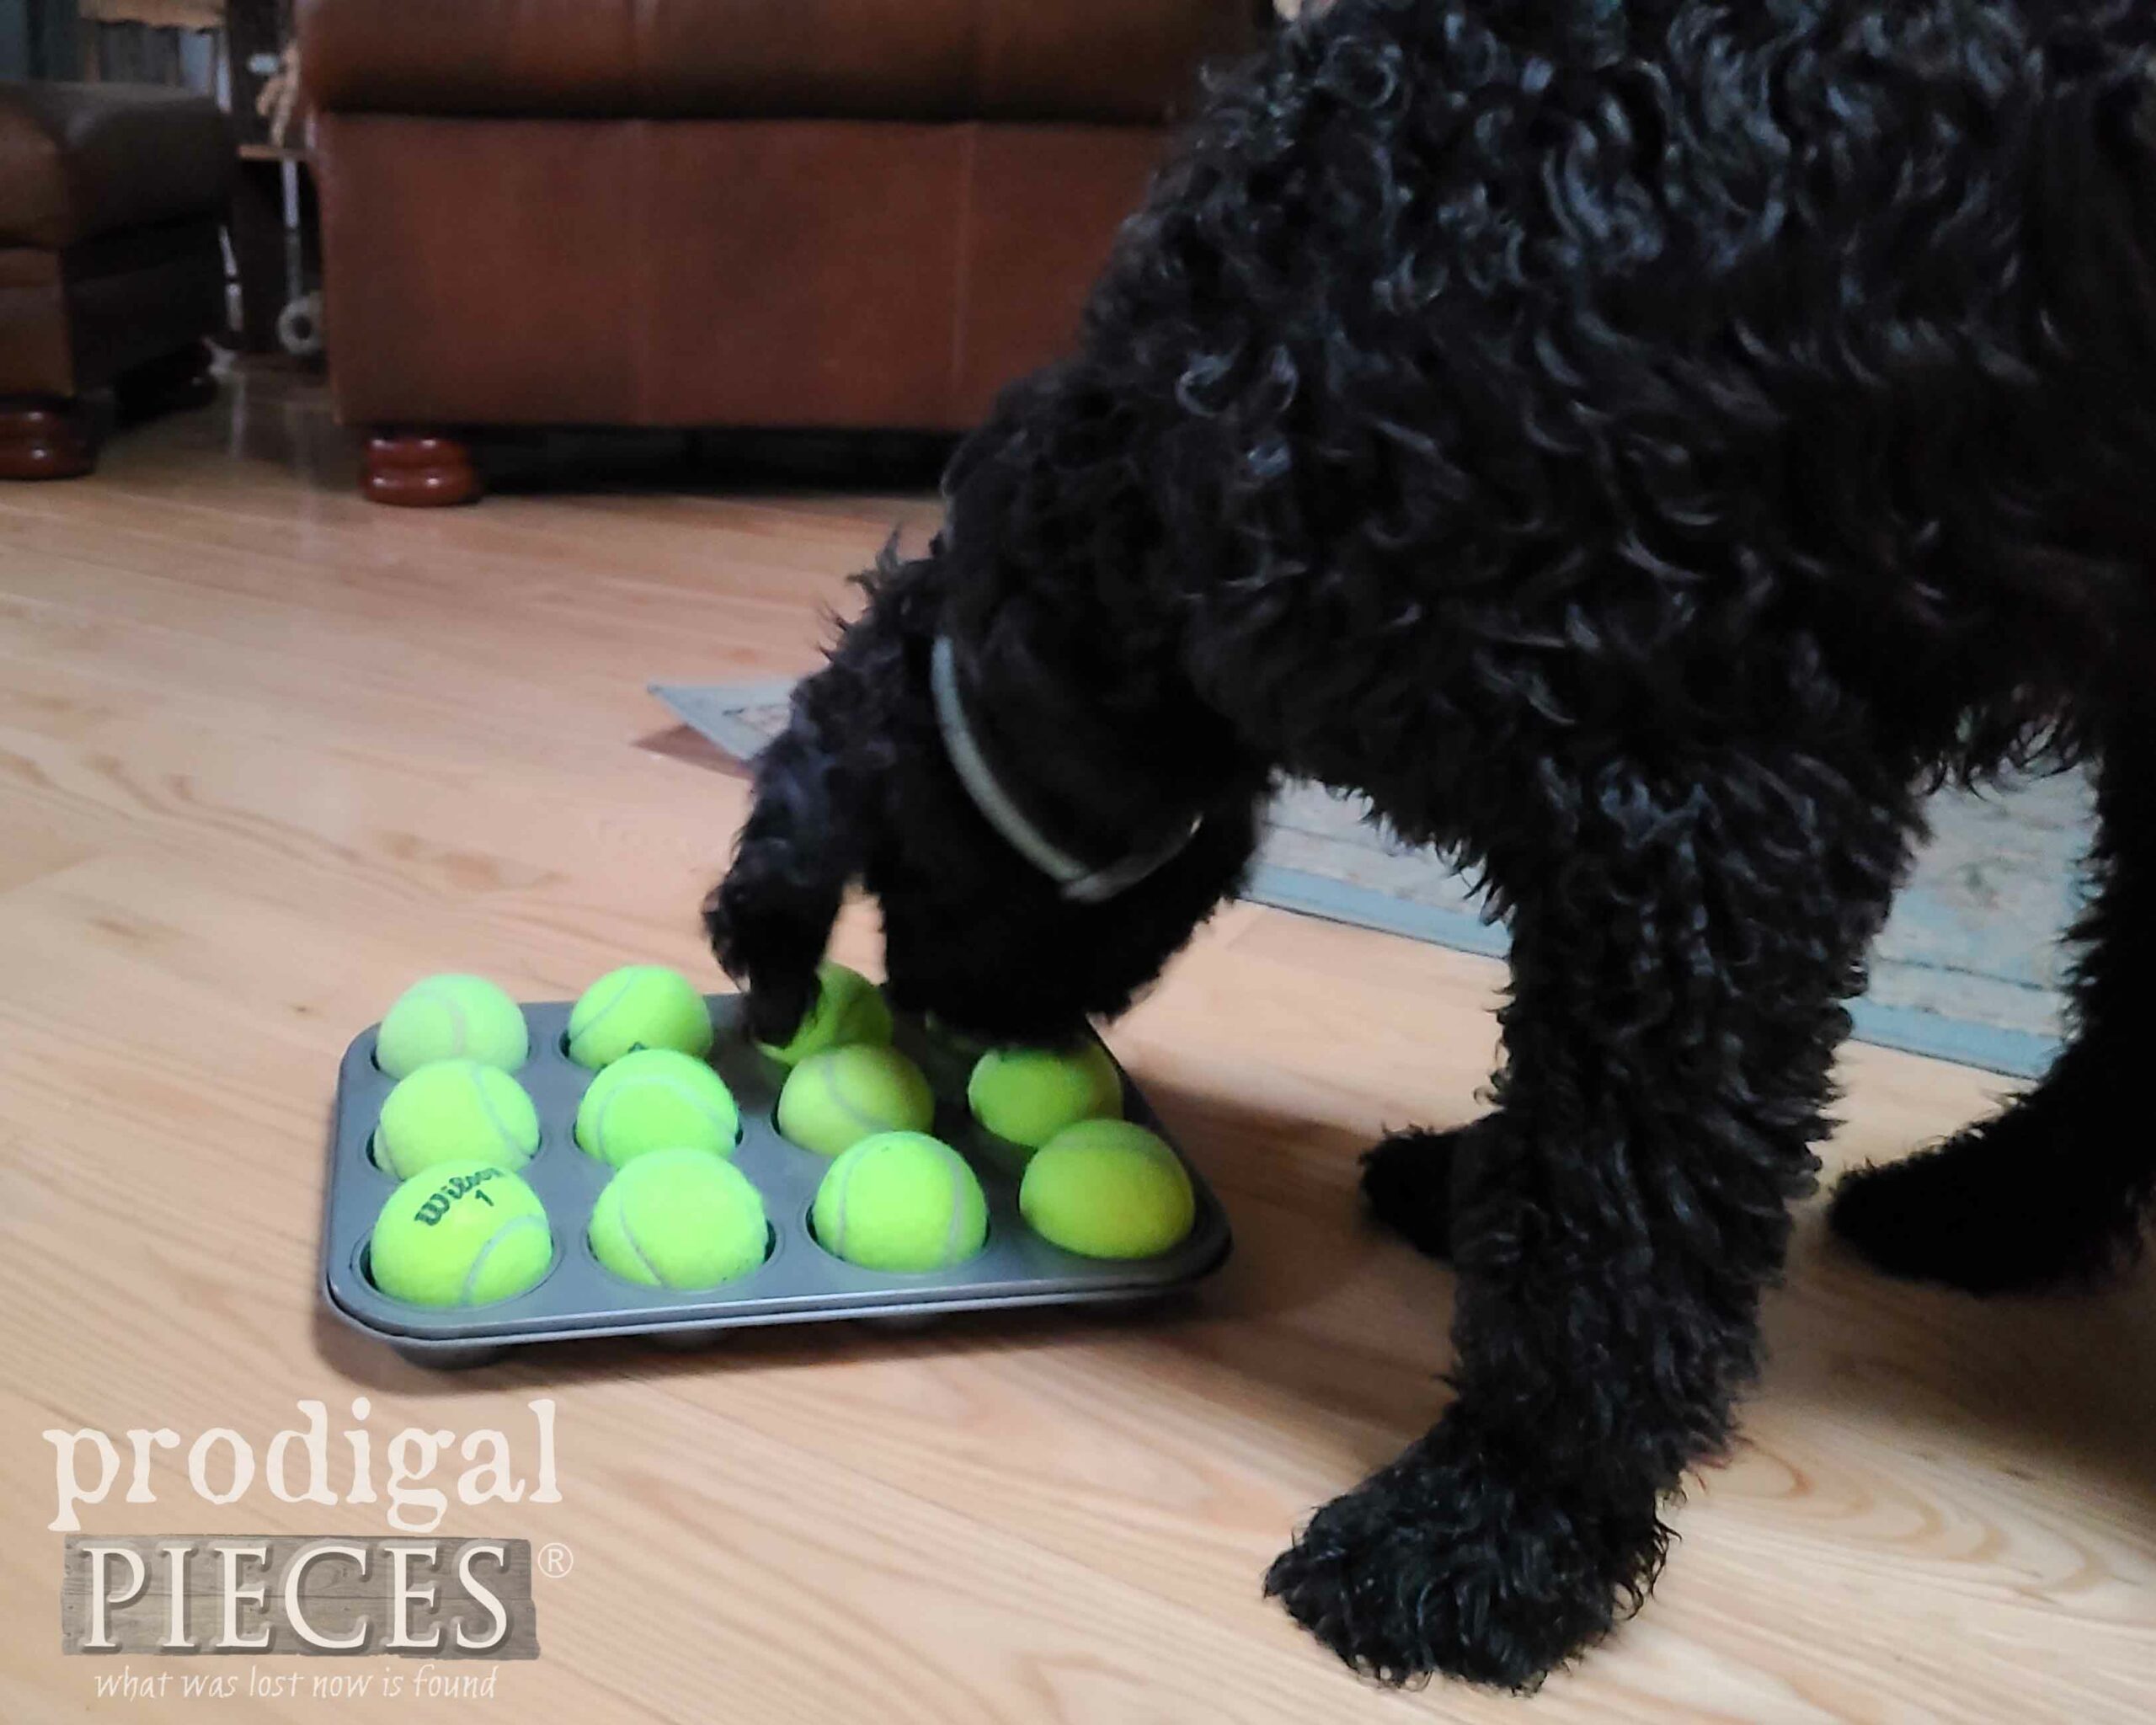 DIY Tennis Balls Treat Pan by Larissa of Prodigal Pieces for Goldendoodle Puppy | prodigalpieces.com #prodigalpieces #diy #dog #doodle